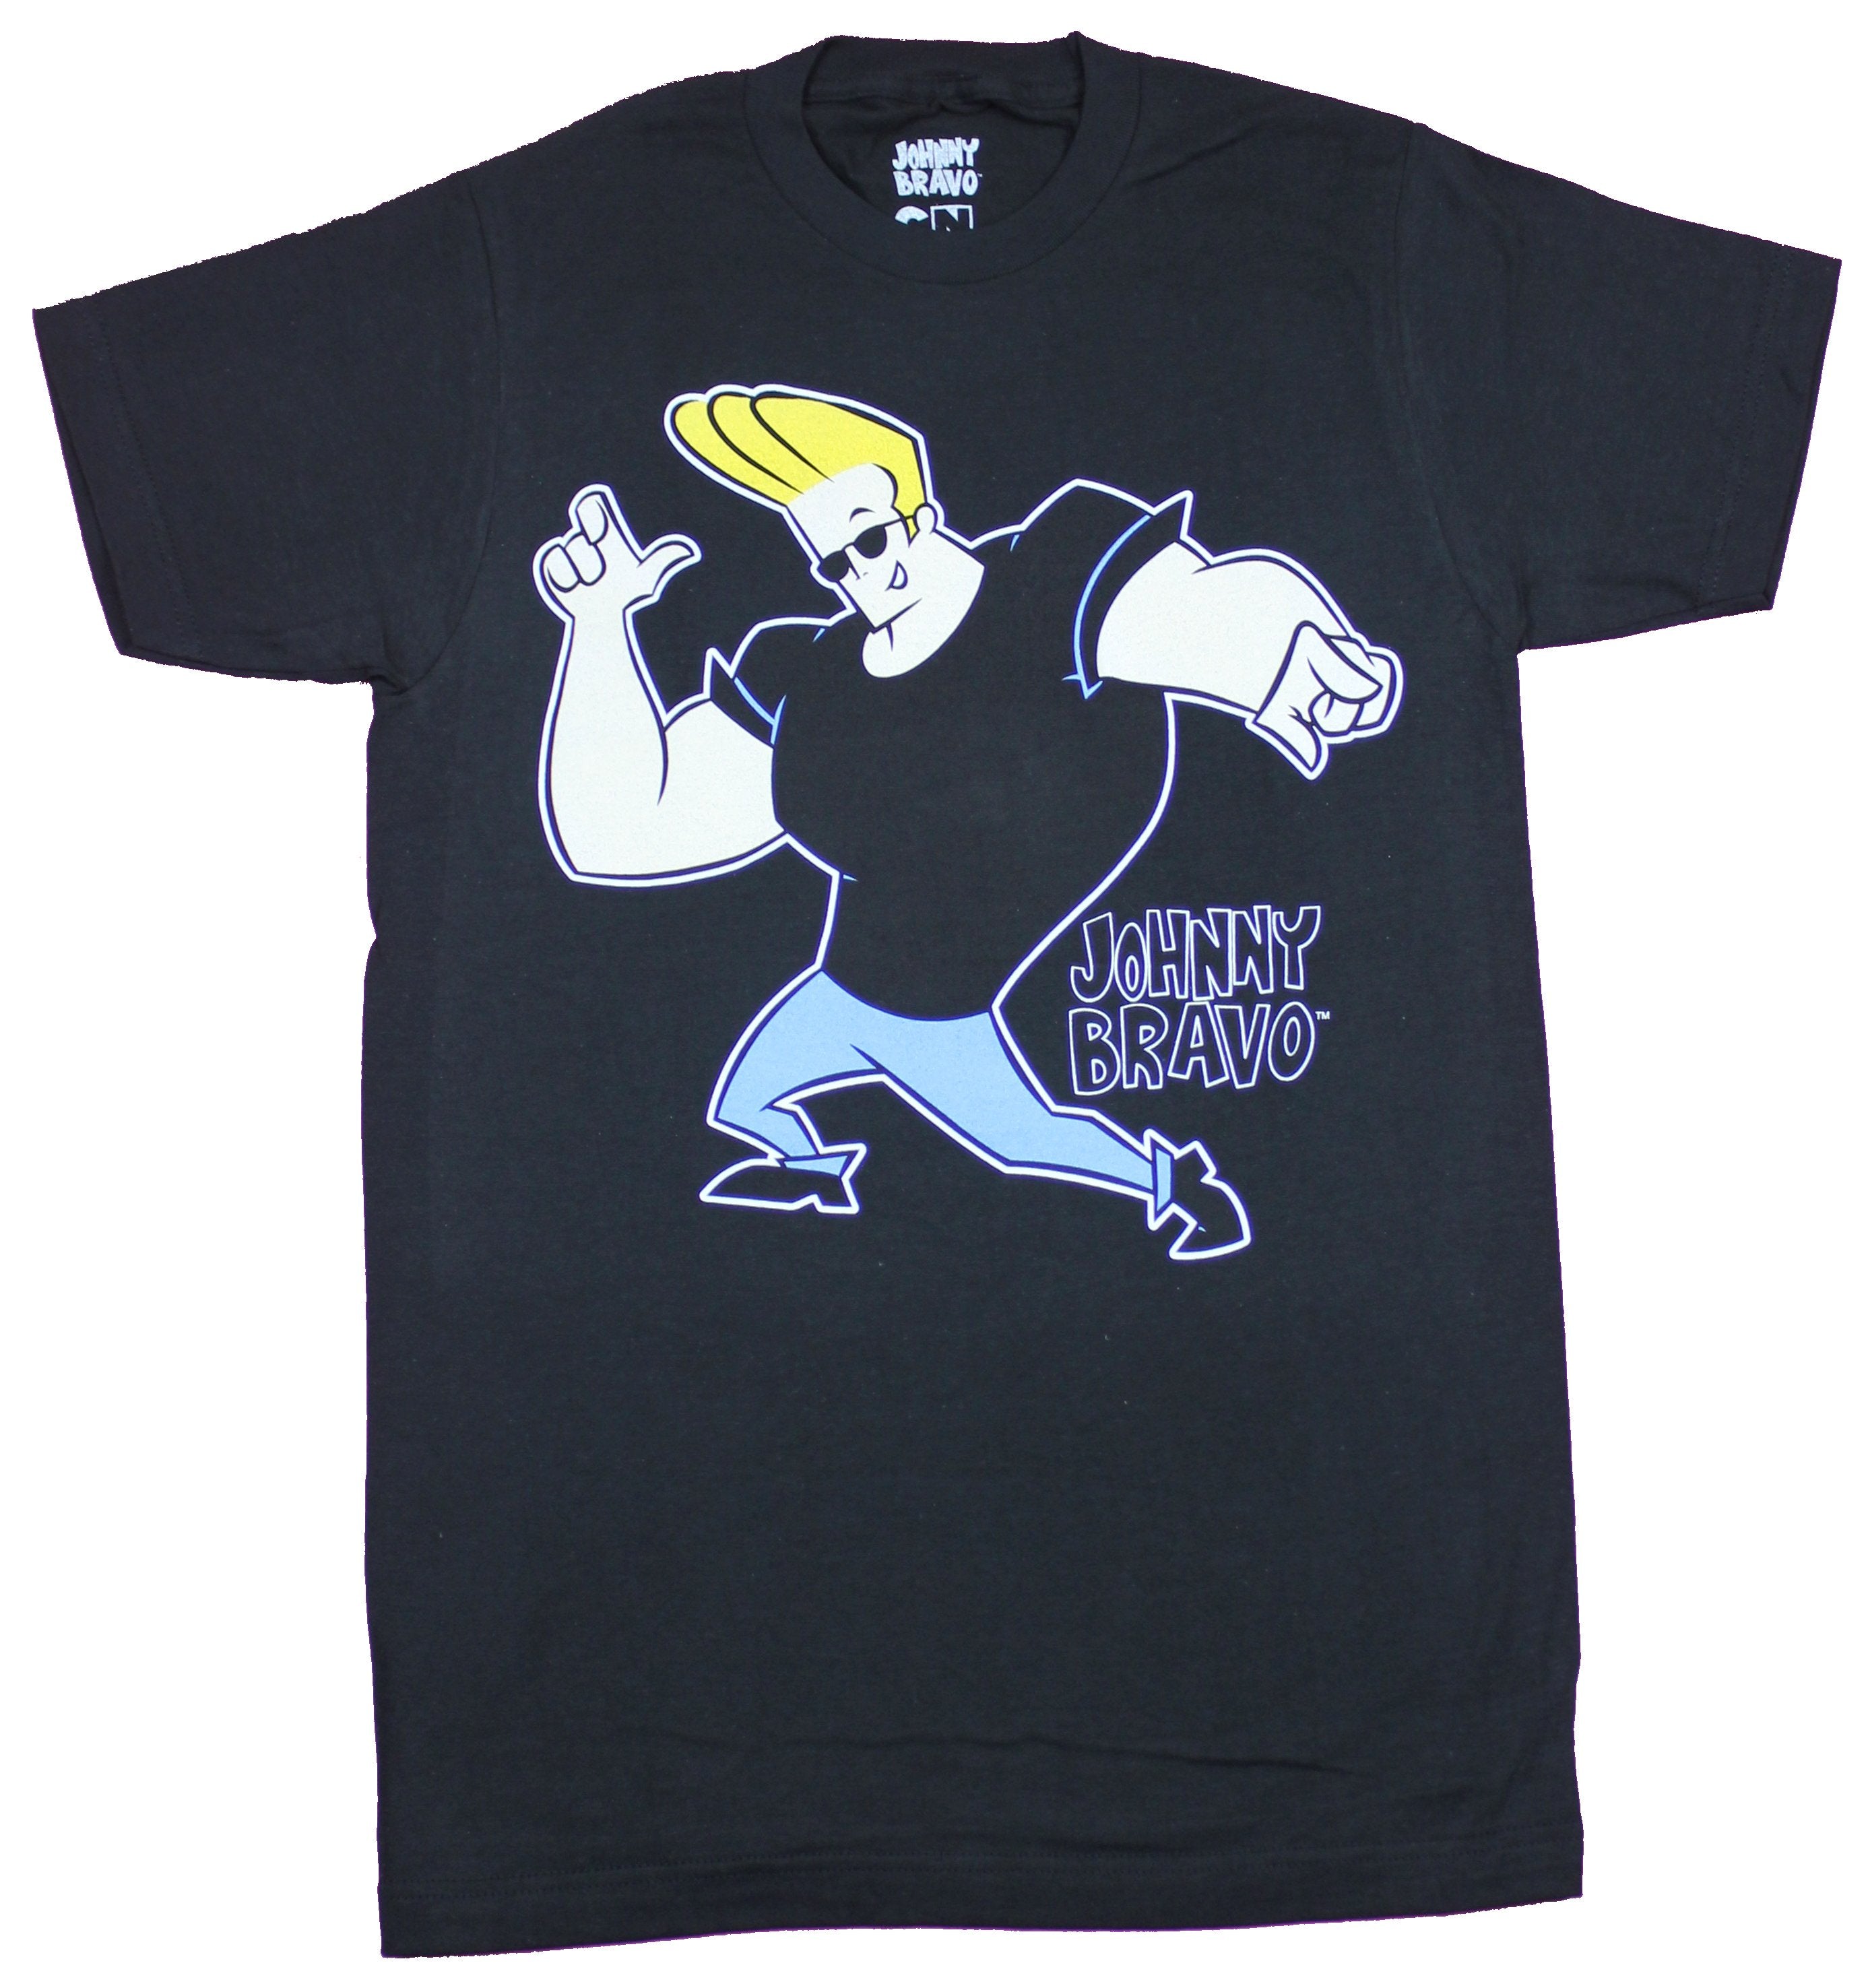 Johnny Bravo Mens T-Shirt - Smile and Point Cool Pose